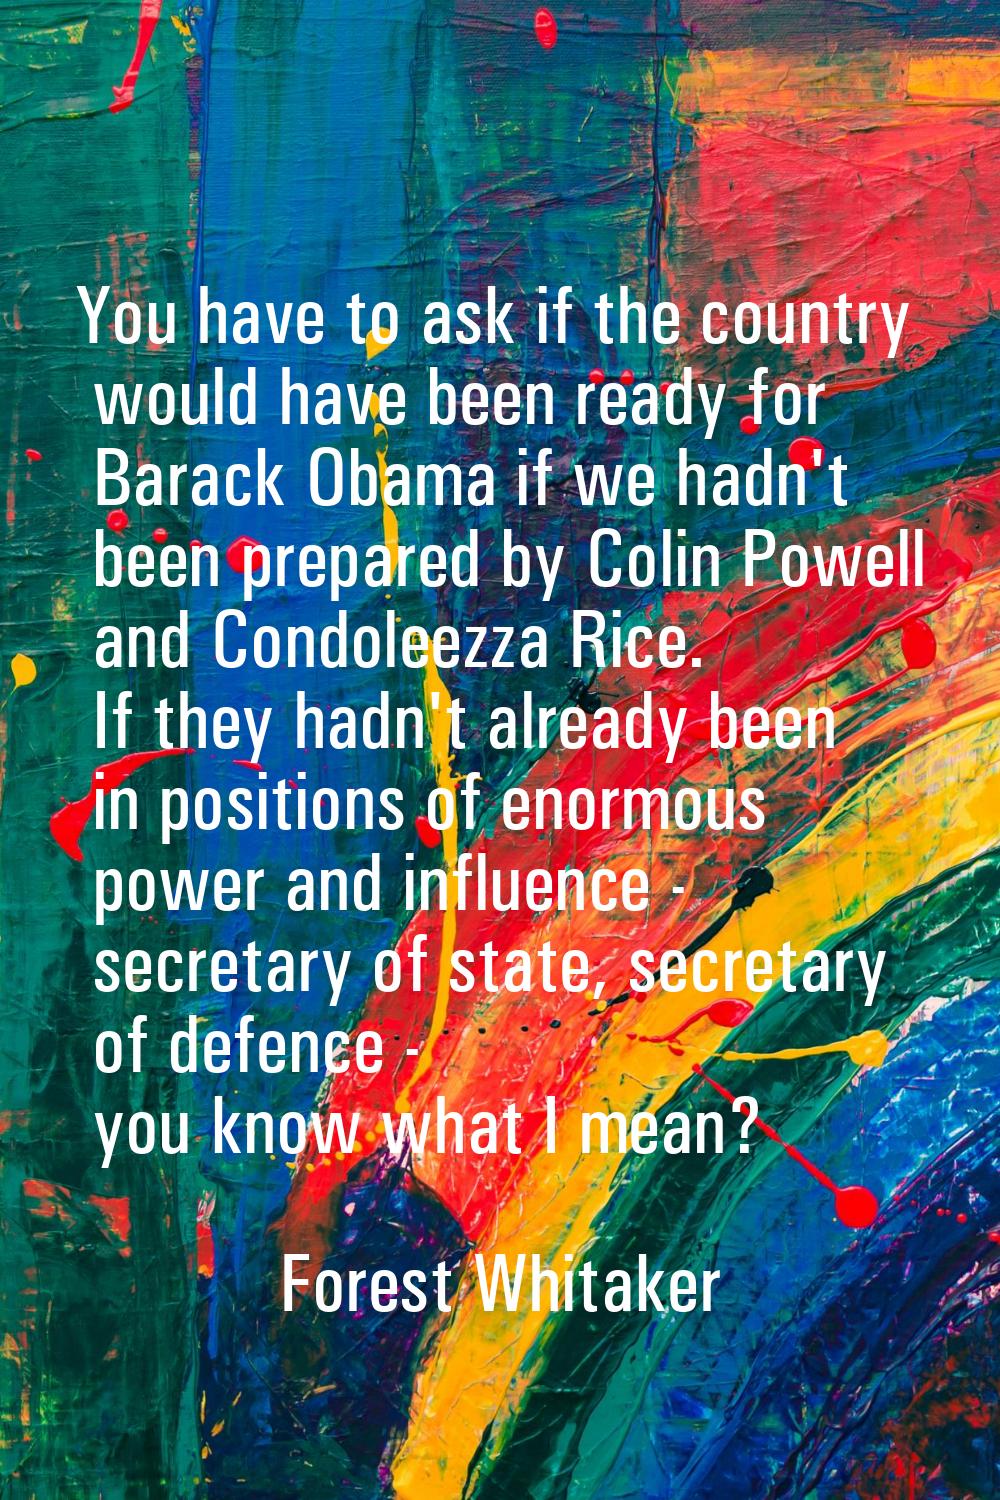 You have to ask if the country would have been ready for Barack Obama if we hadn't been prepared by